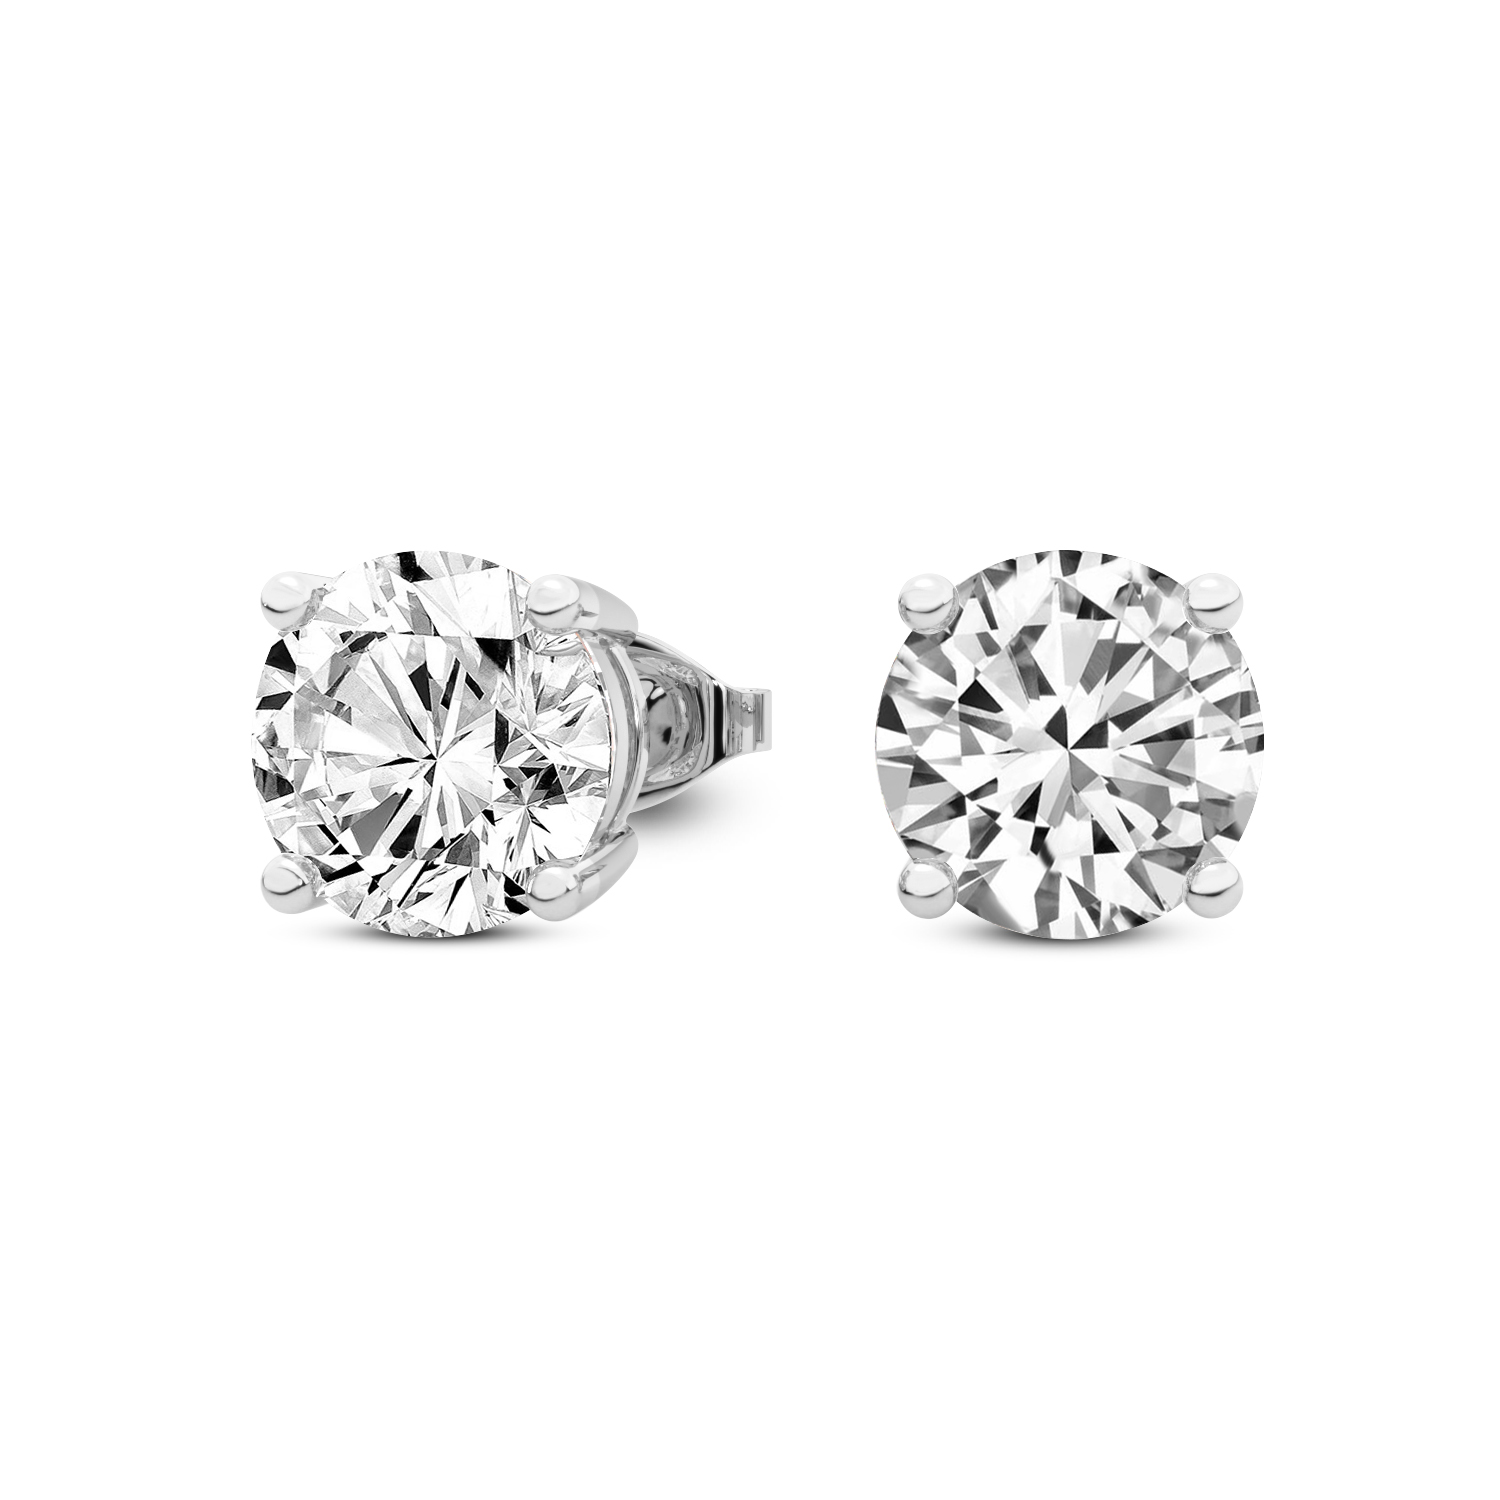 4 Prong Round Lab Diamond Stud Earrings (3.00 Ct. Tw.) 14Kt White Gold.